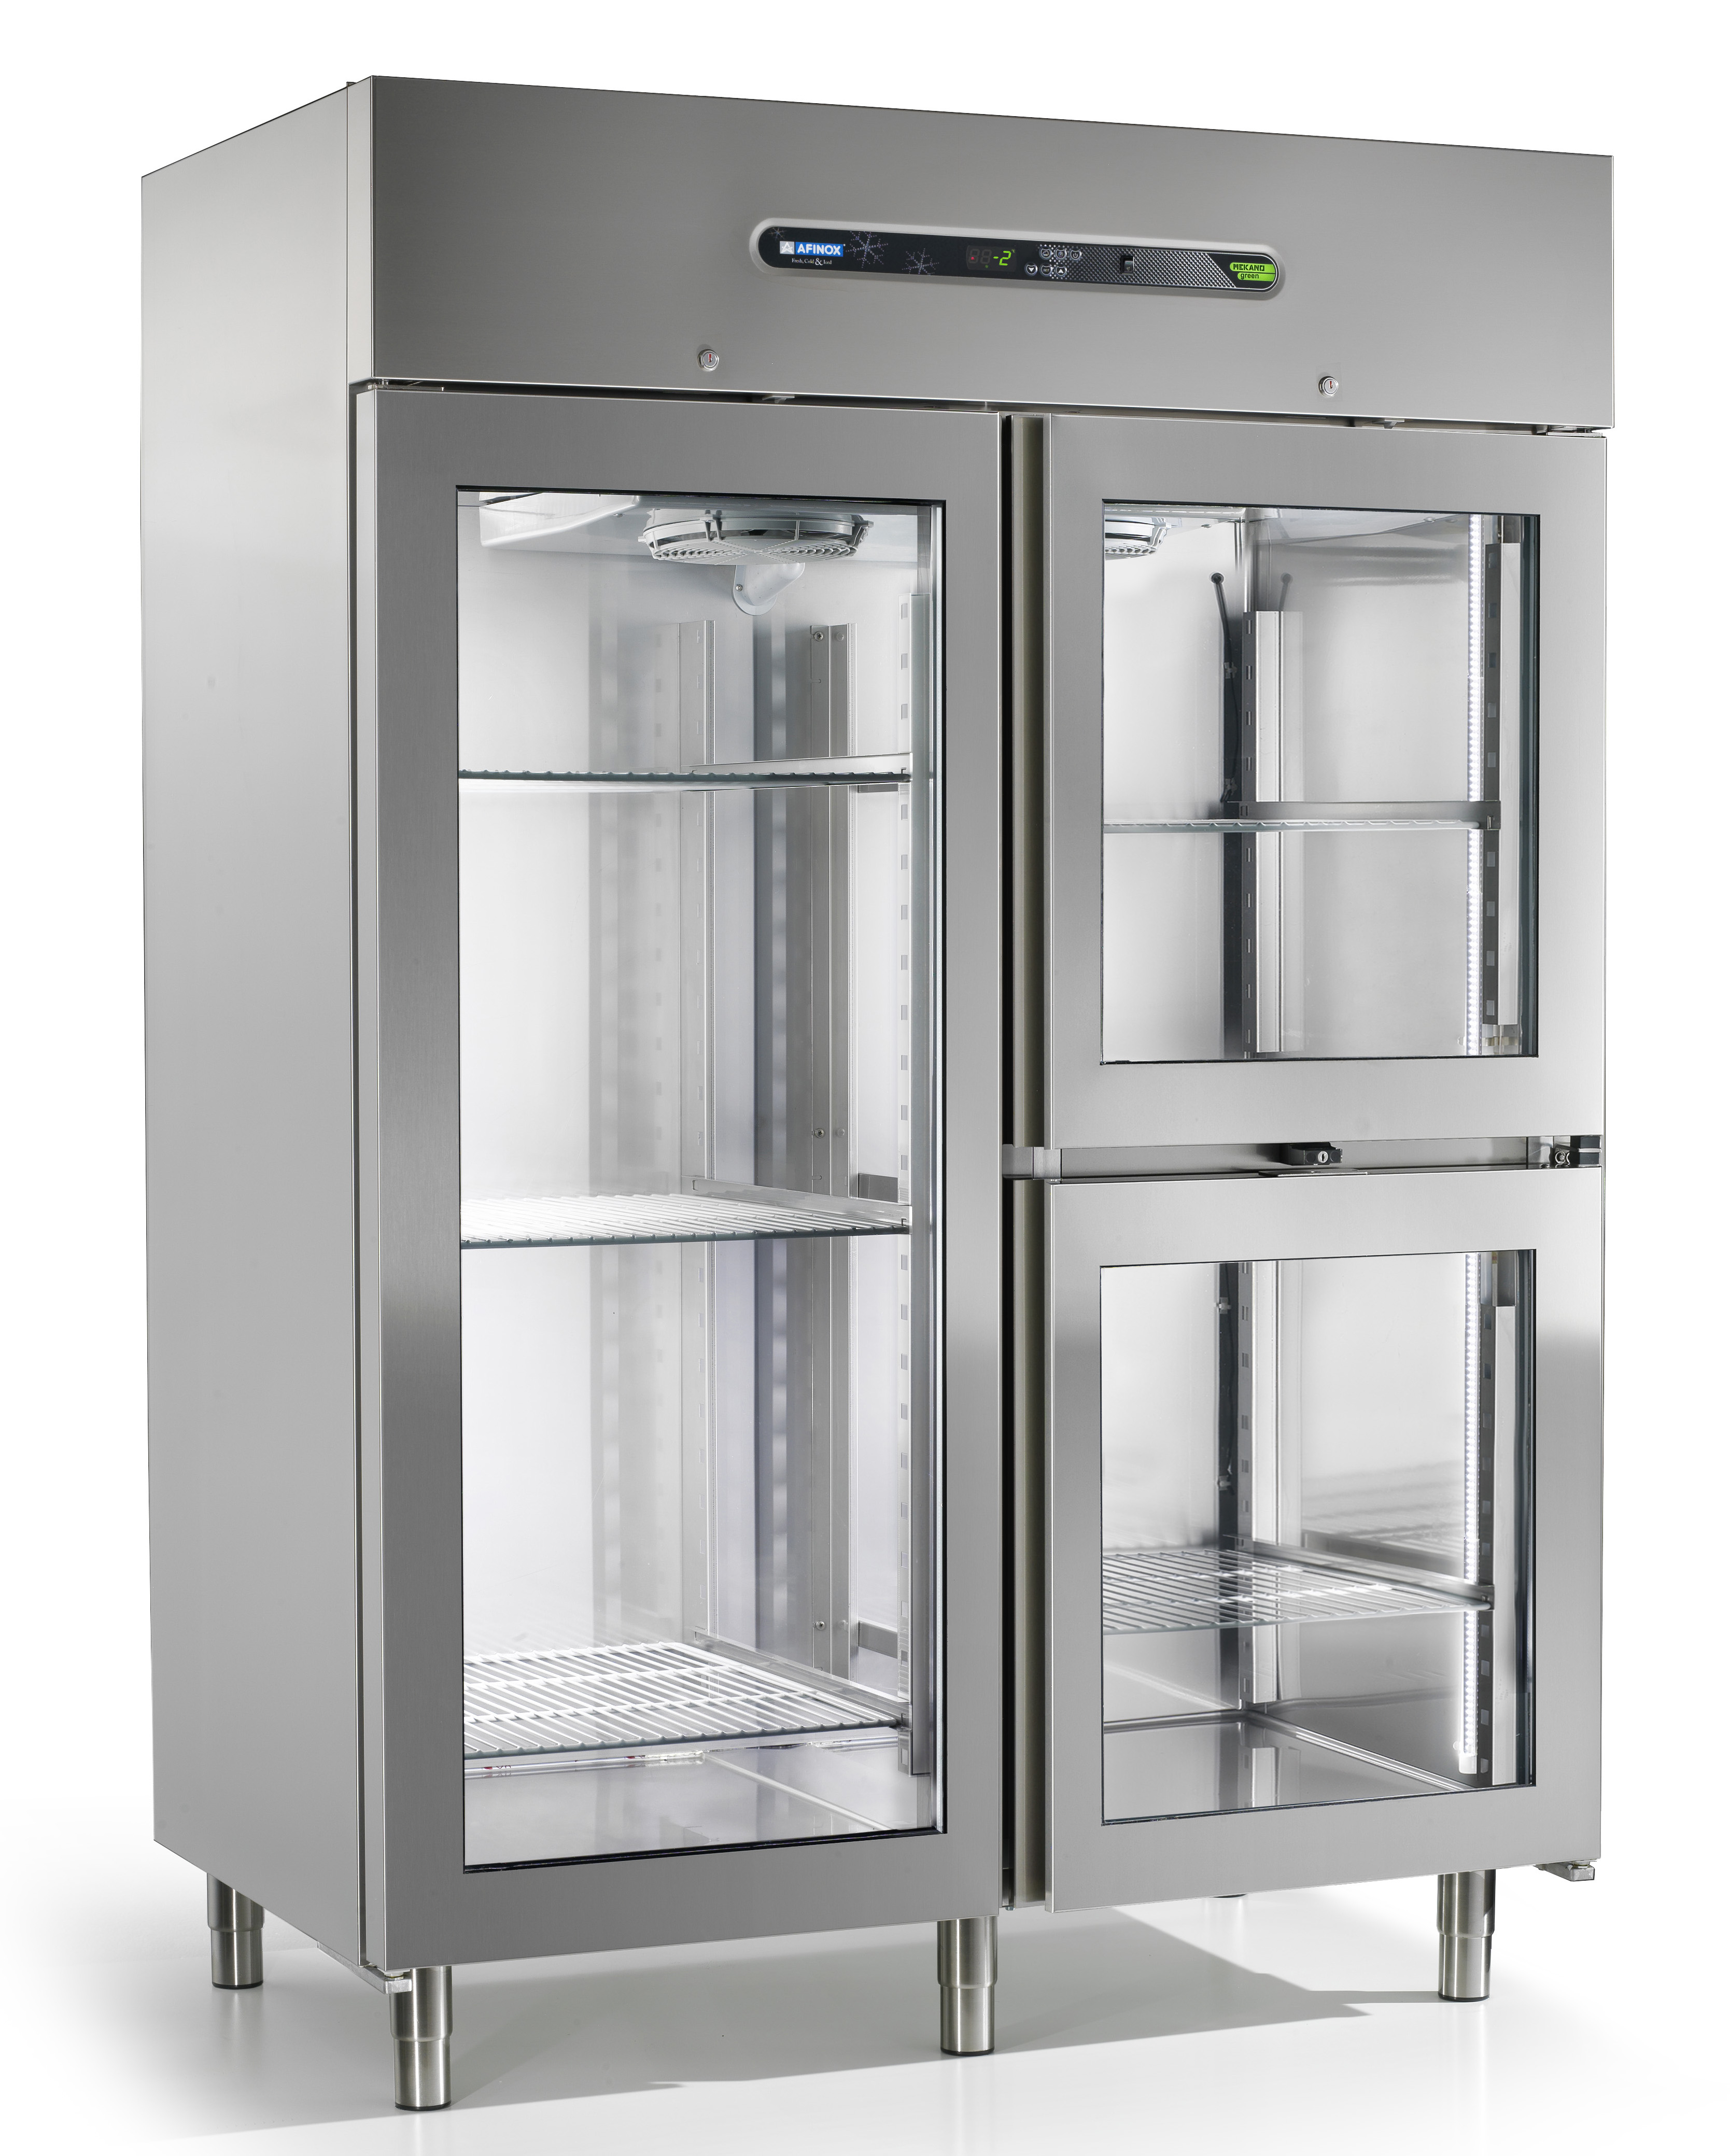 Green Plus 1400 Tn Pv Upright Chiller Glass Doors Able Products